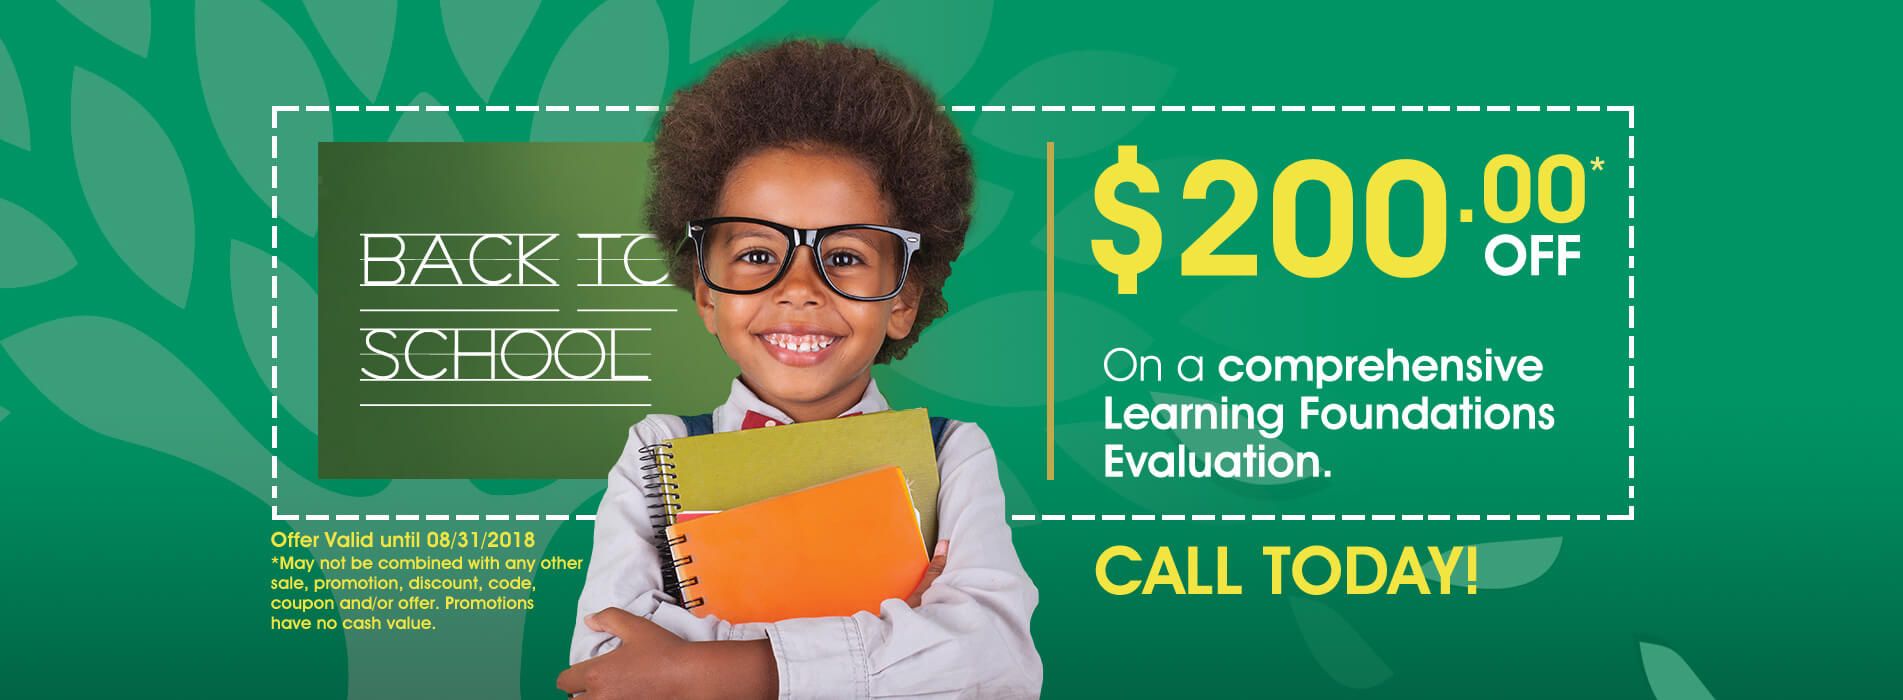 200 Dollars Off Learning Foundations Evaluation